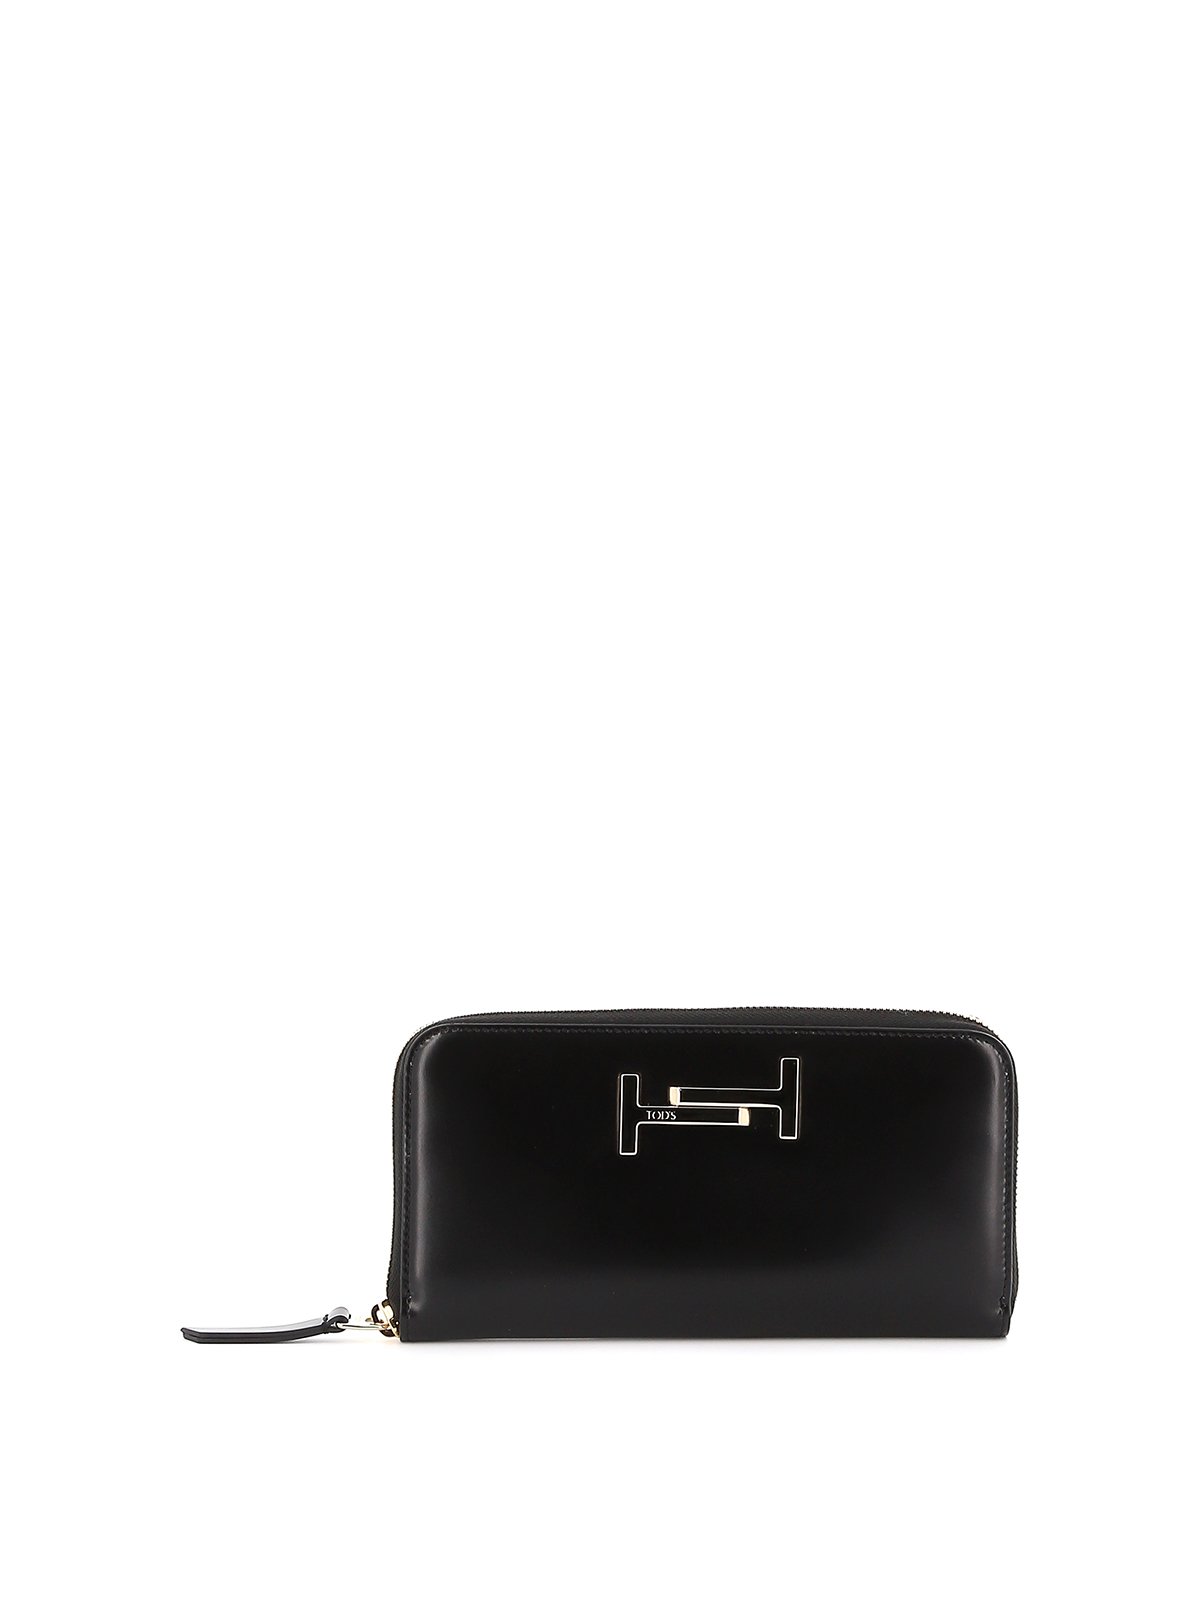 TOD'S DOUBLE T BLACK LEATHER WALLET